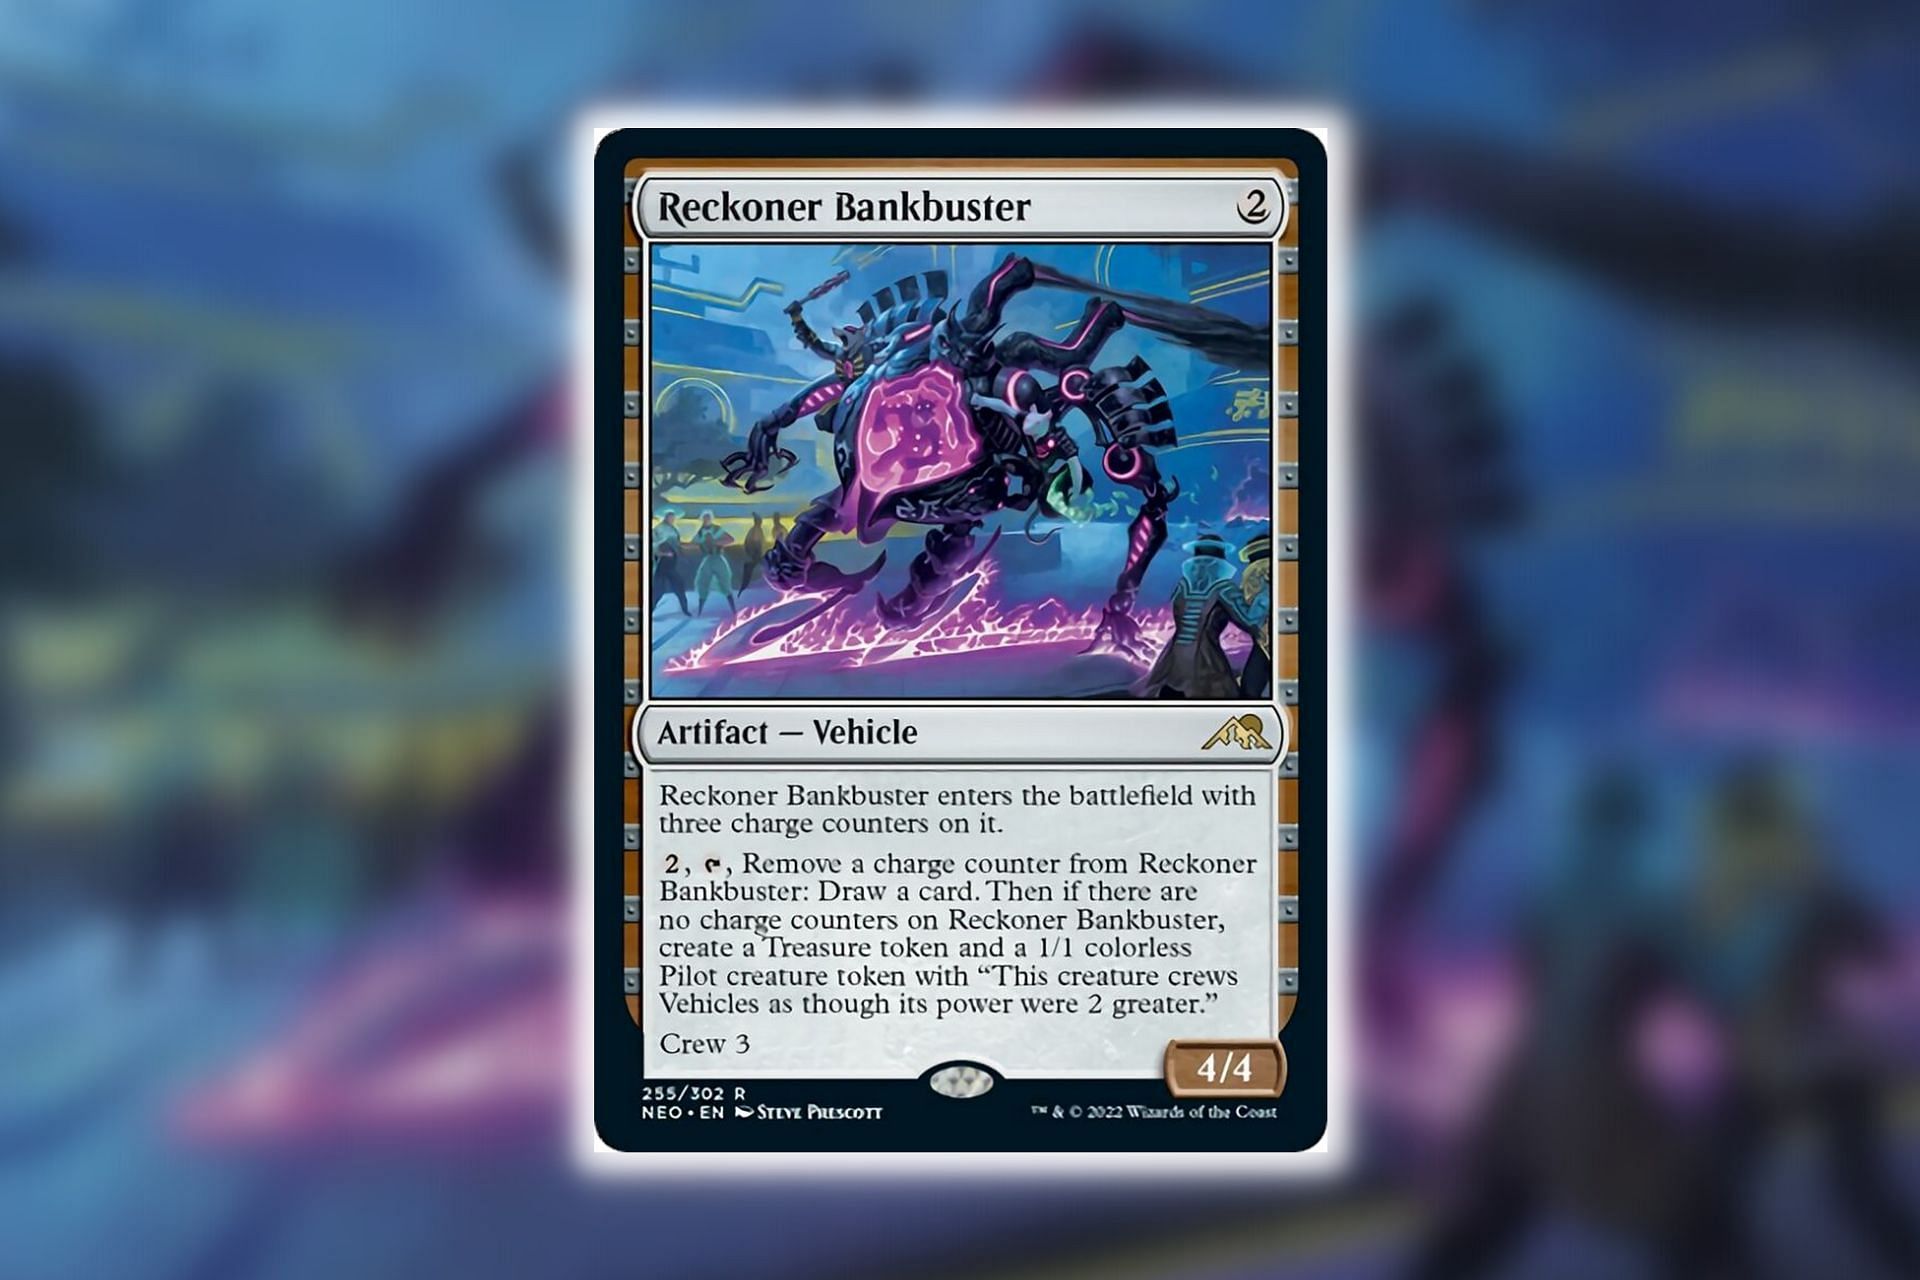 Reckoner Bankbuster in Magic: The Gathering (Image via Wizards of the Coast)